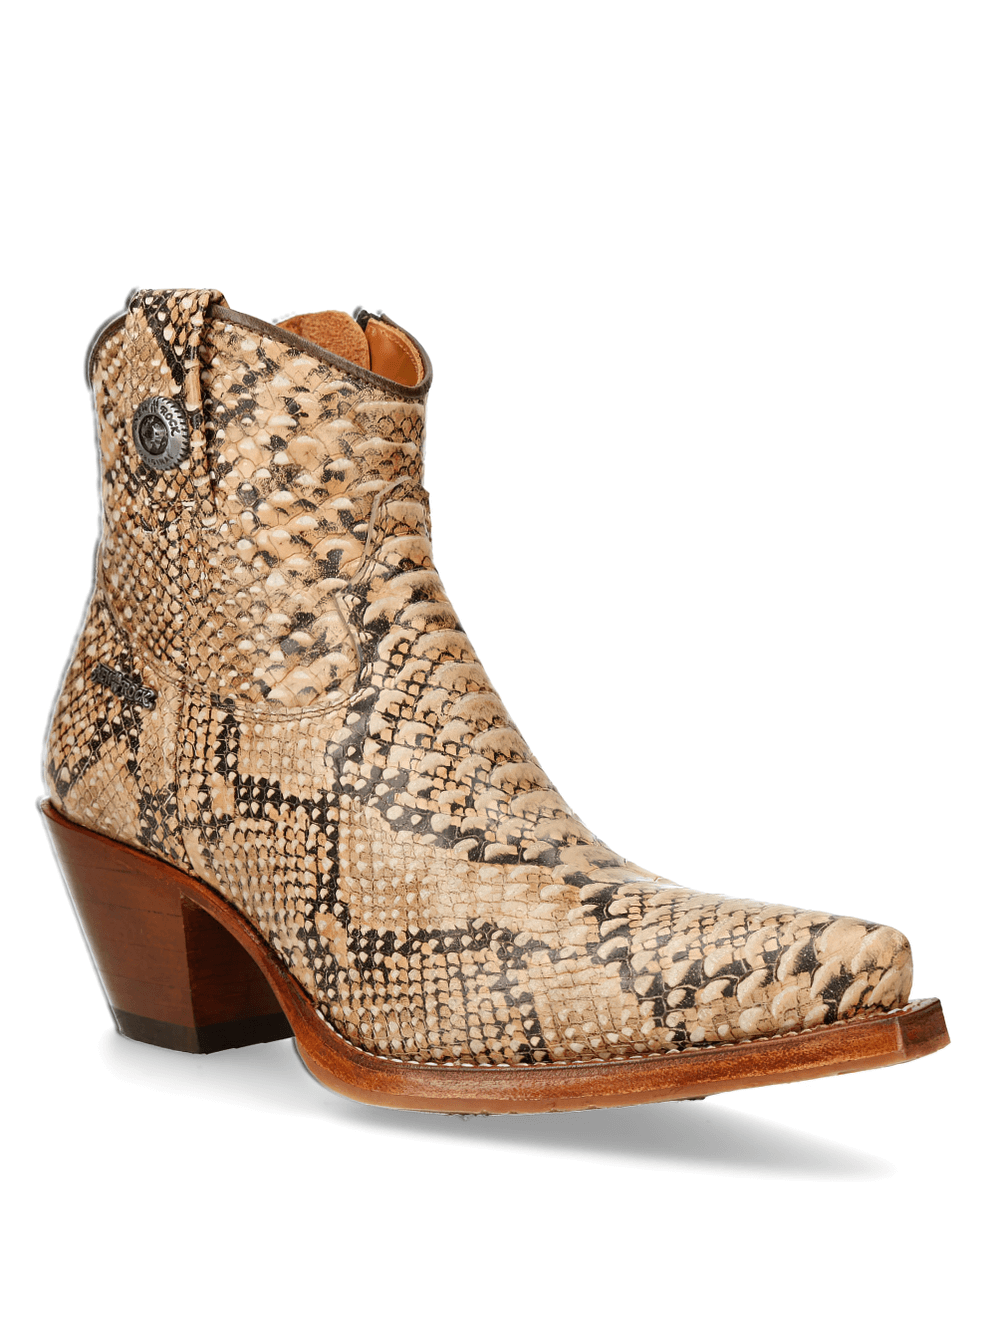 NEW ROCK Snakeskin Ankle Boots with Side Zipper